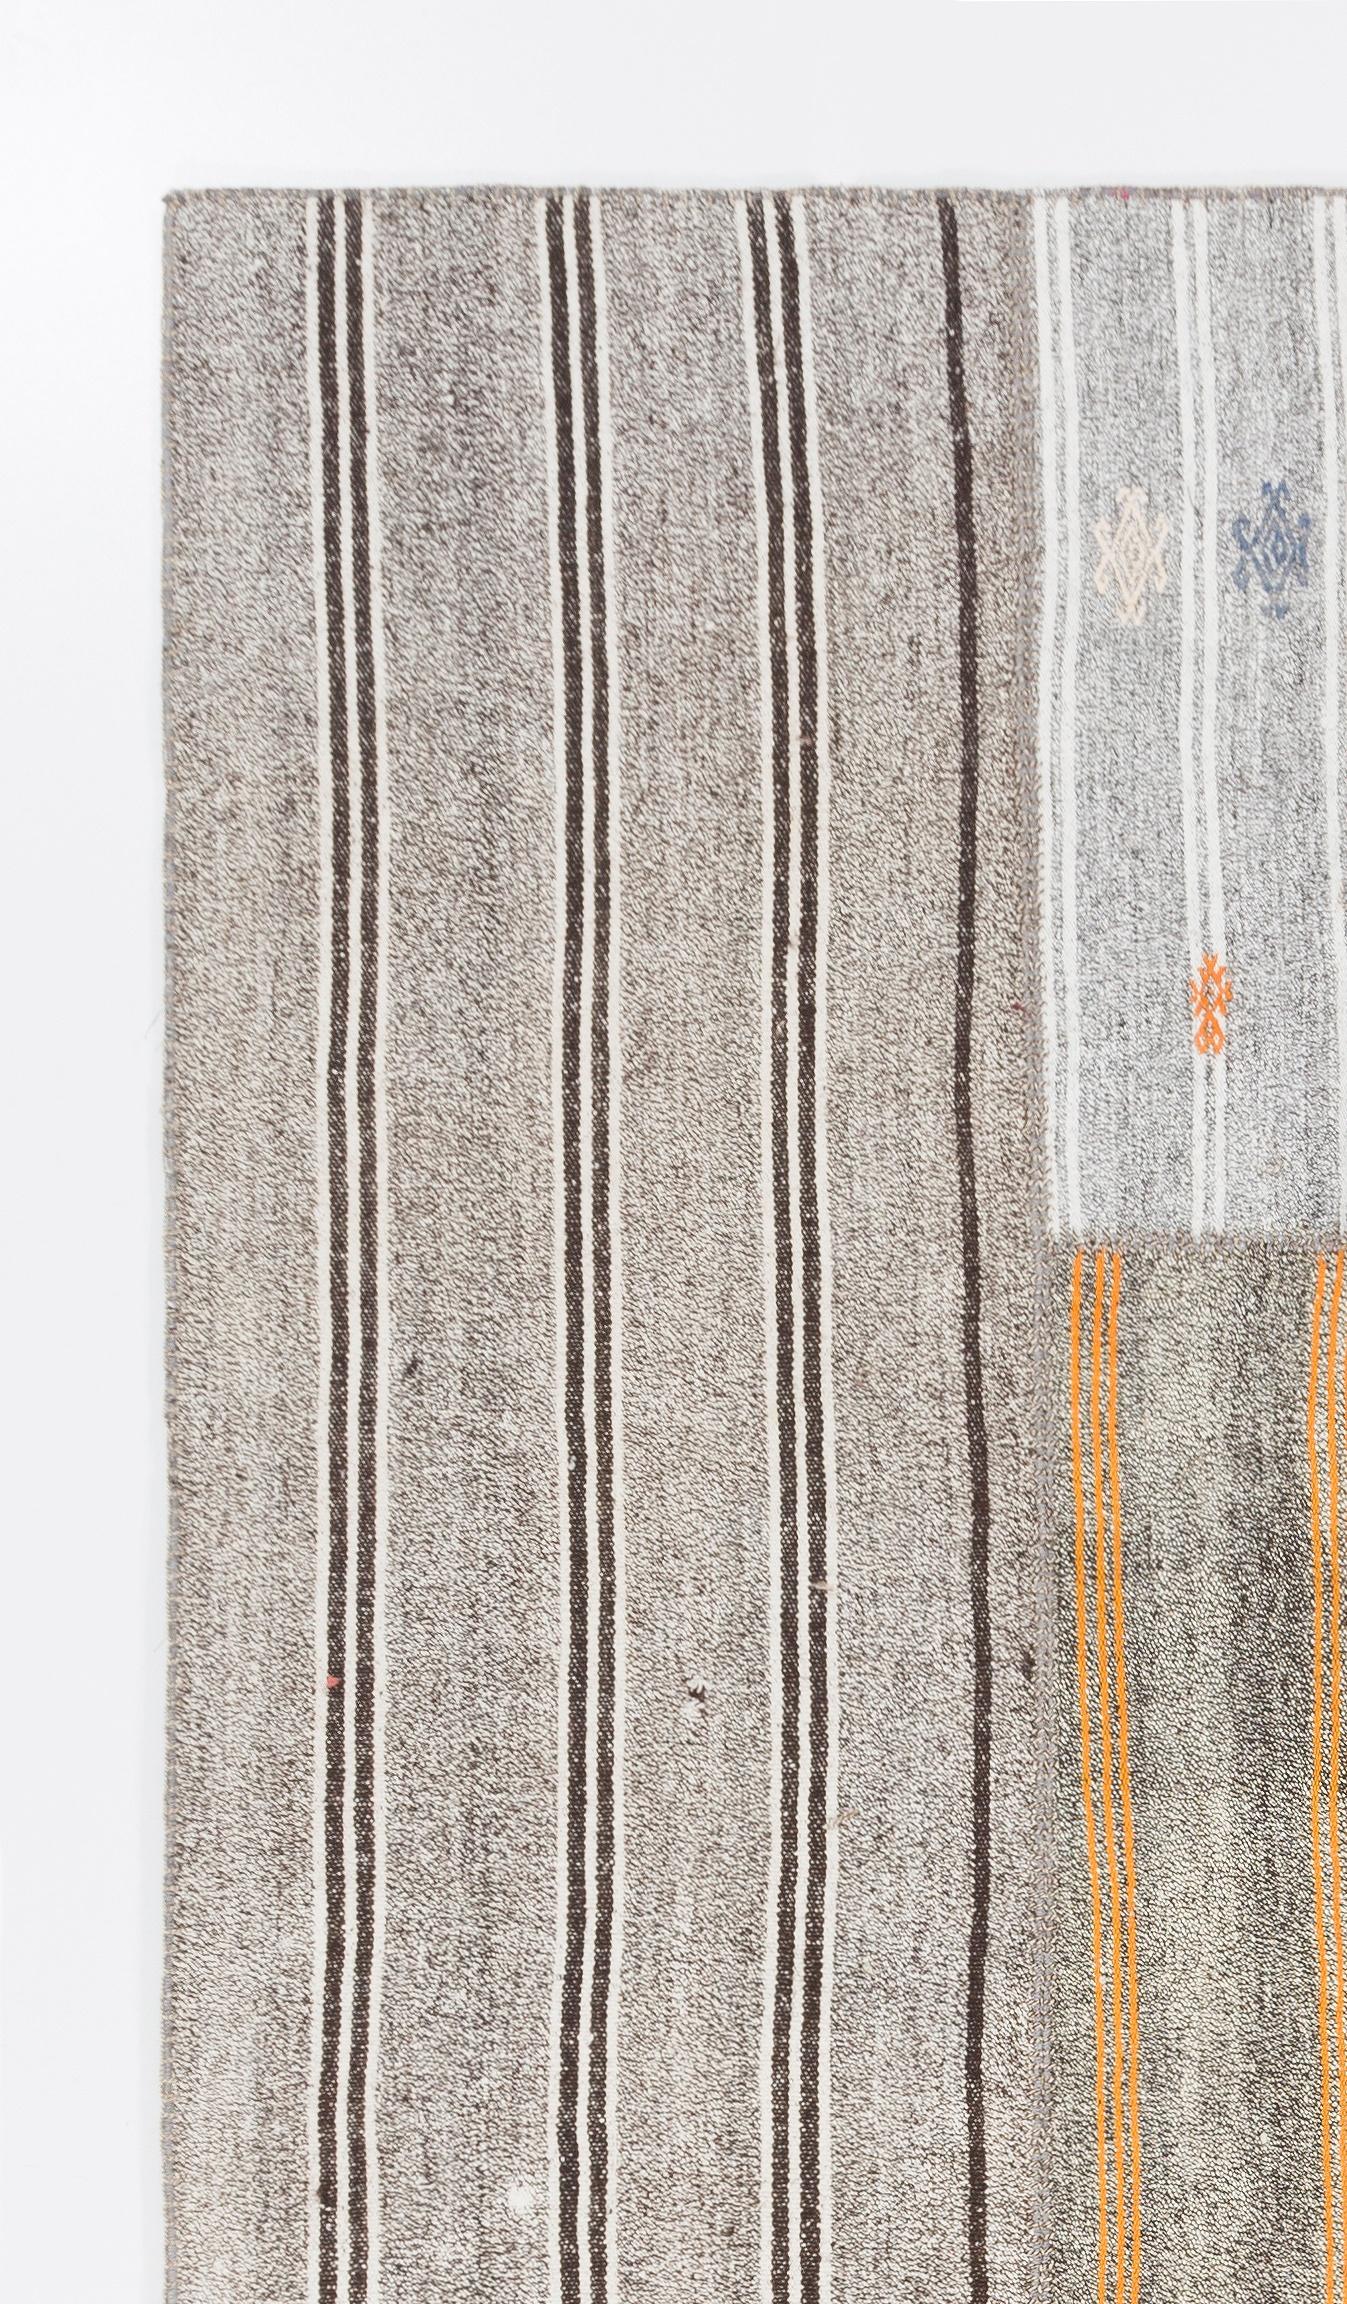 A simple, minimalist Turkish flat-weave/kilim patchwork rug made up of hand-woven and hand-stitched vintage kilim pieces that feature stripes and burdock motifs against the speckled looking texture of the background, in brown, gray, ivory and